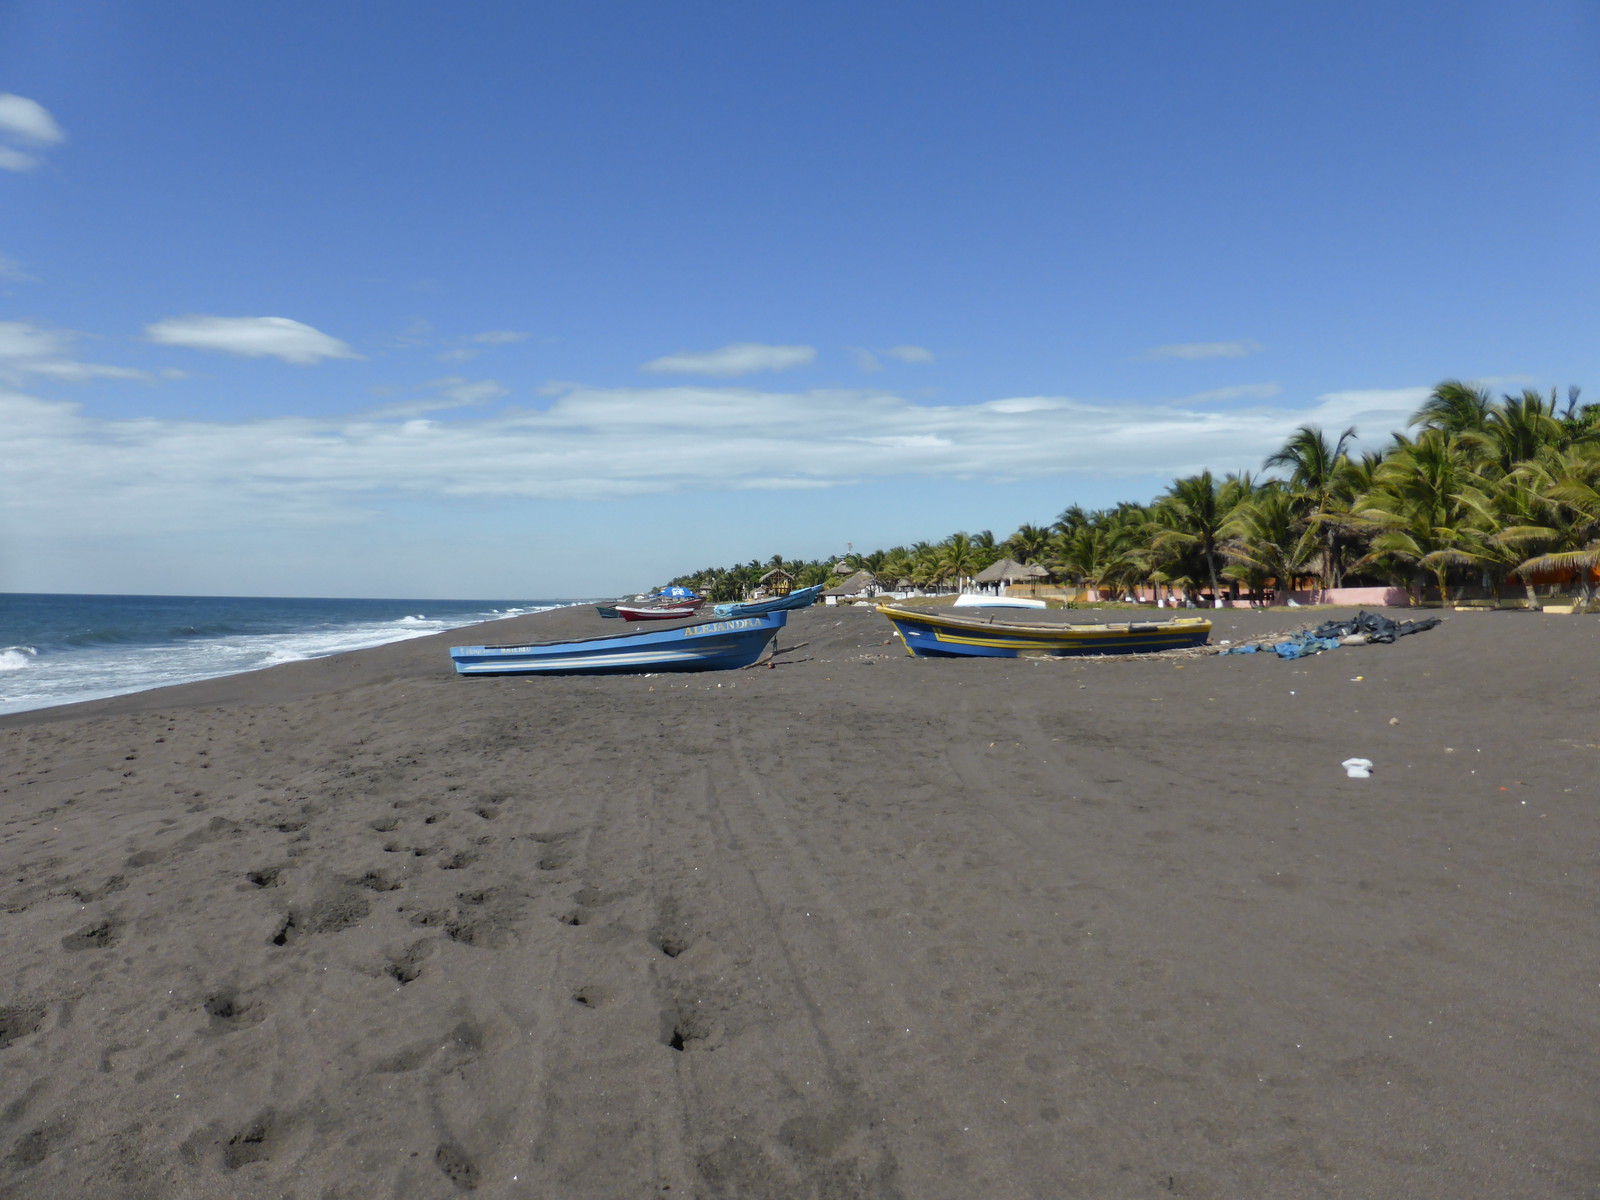 Looking north along the black sands of Monterrico beach